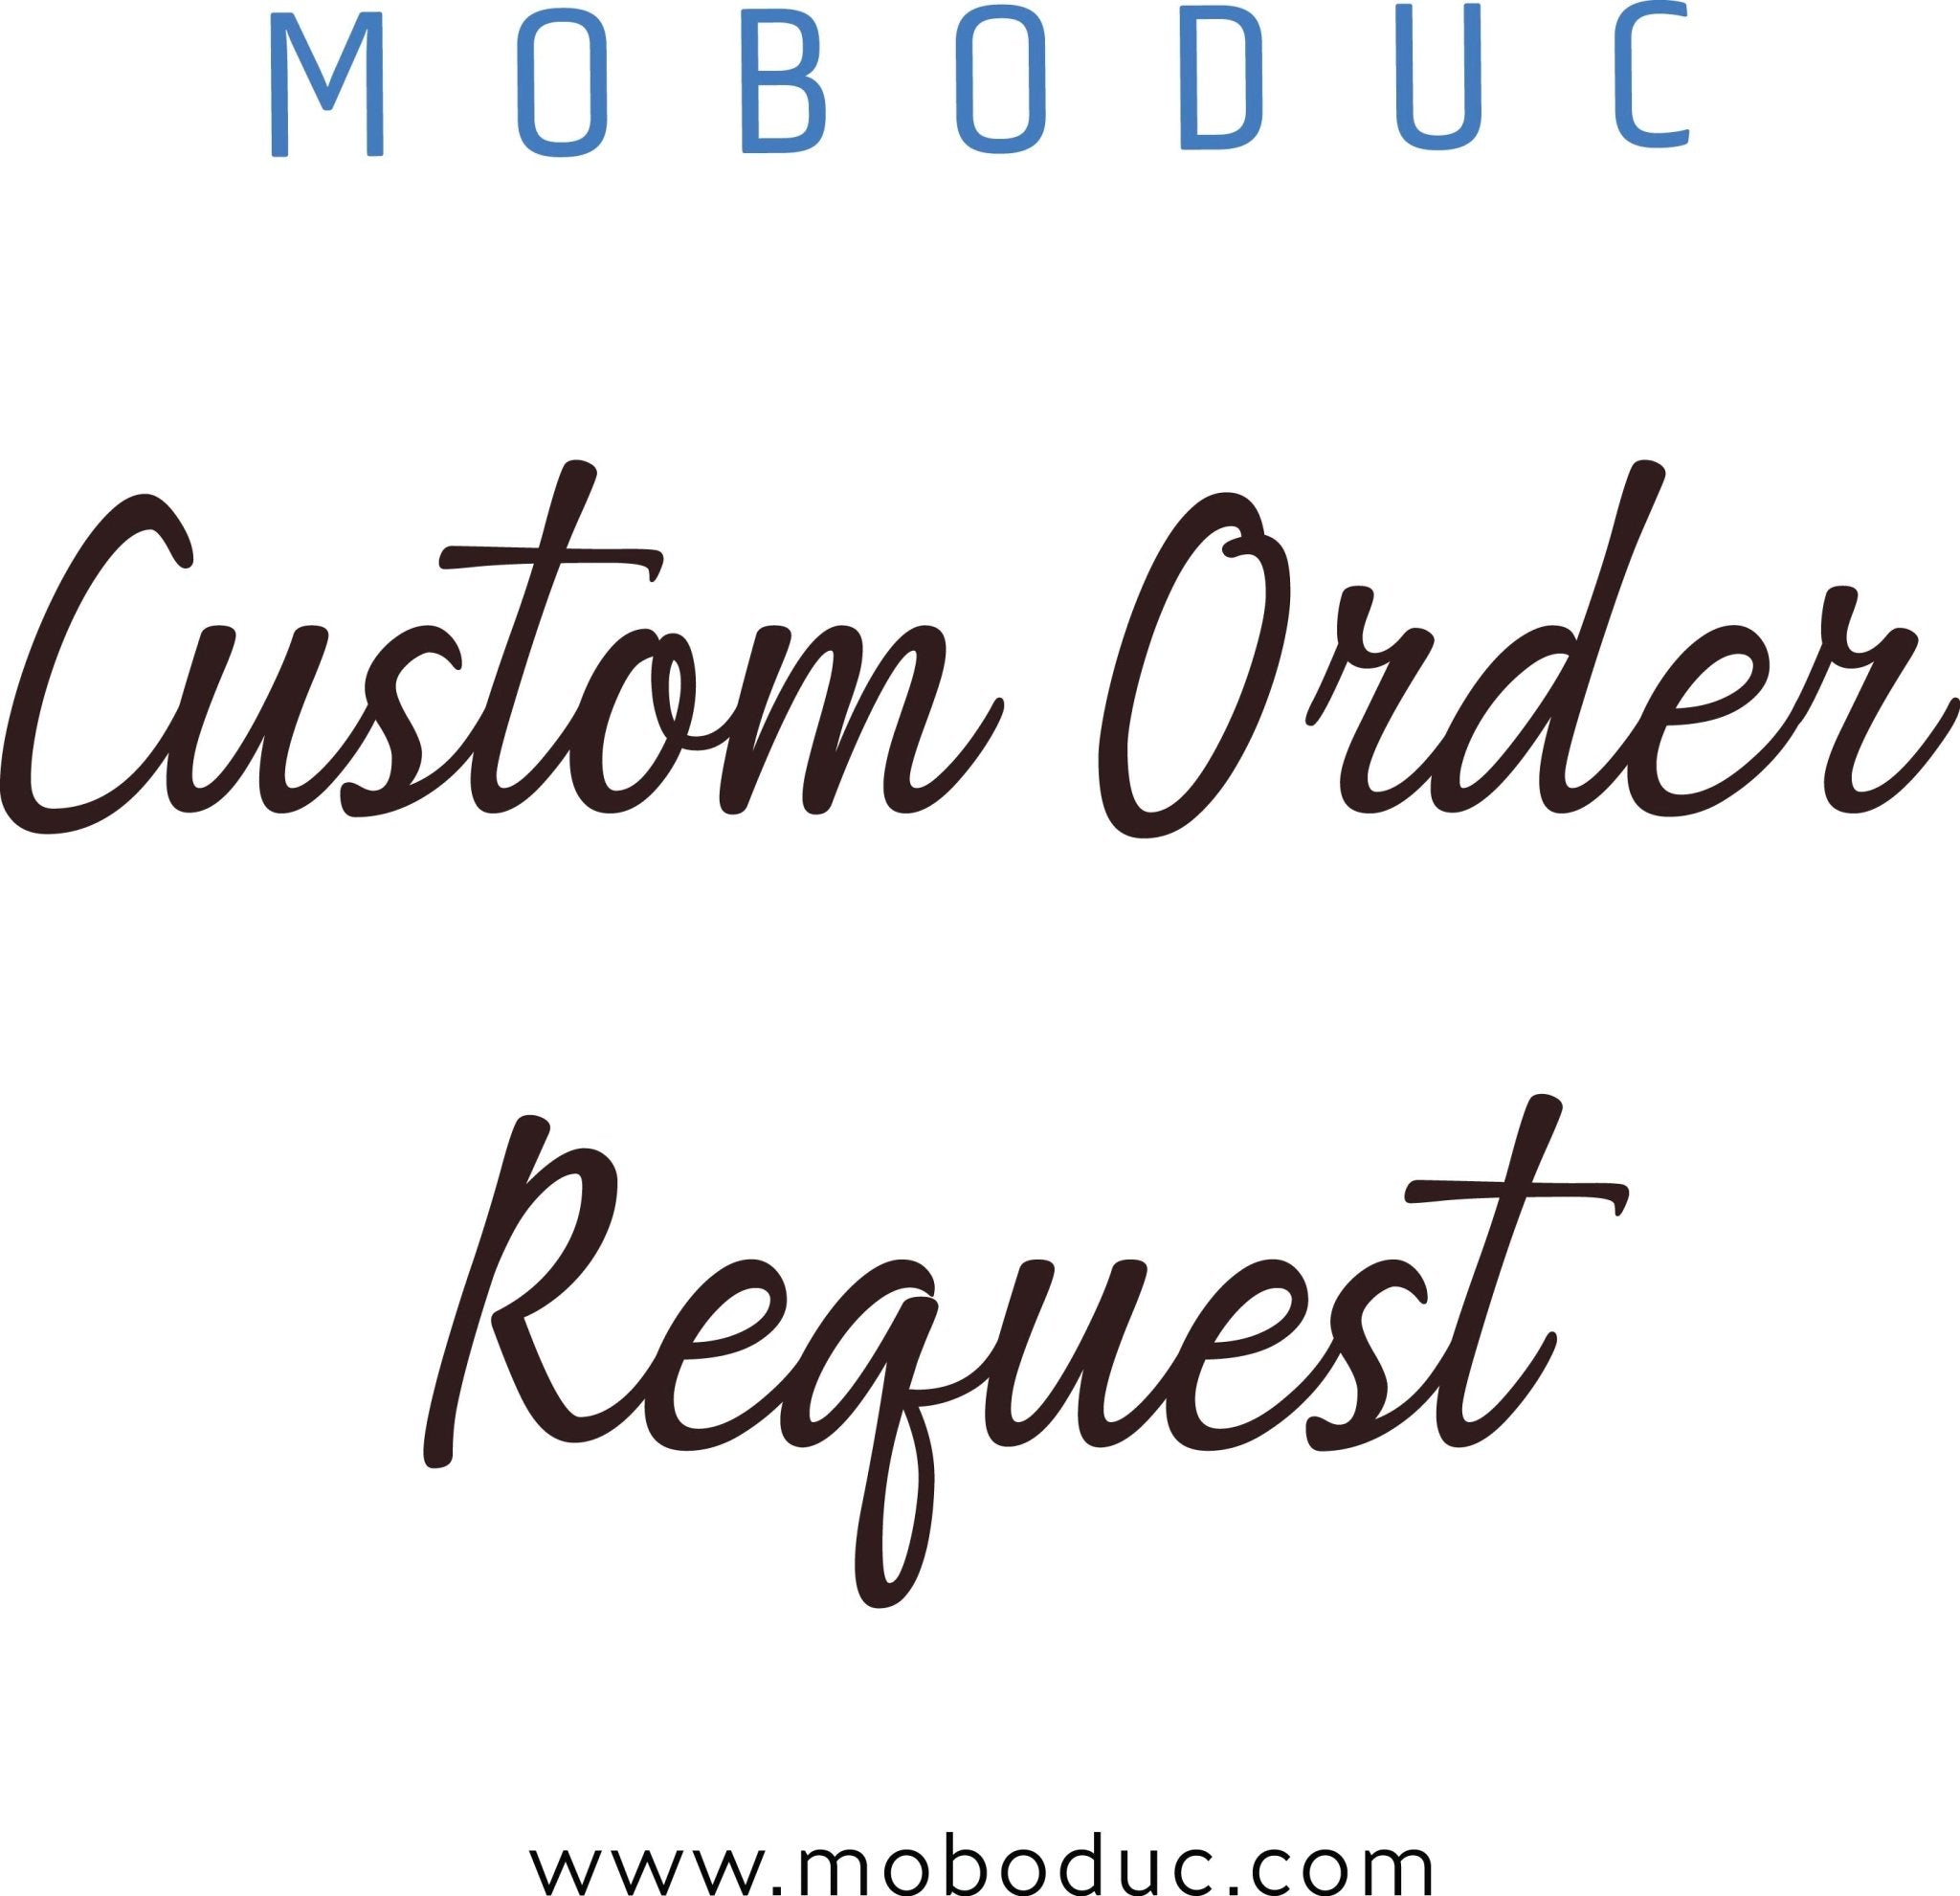 Custom Order Request for Jewelry Design and Making - Moboduc Custom Jewelry